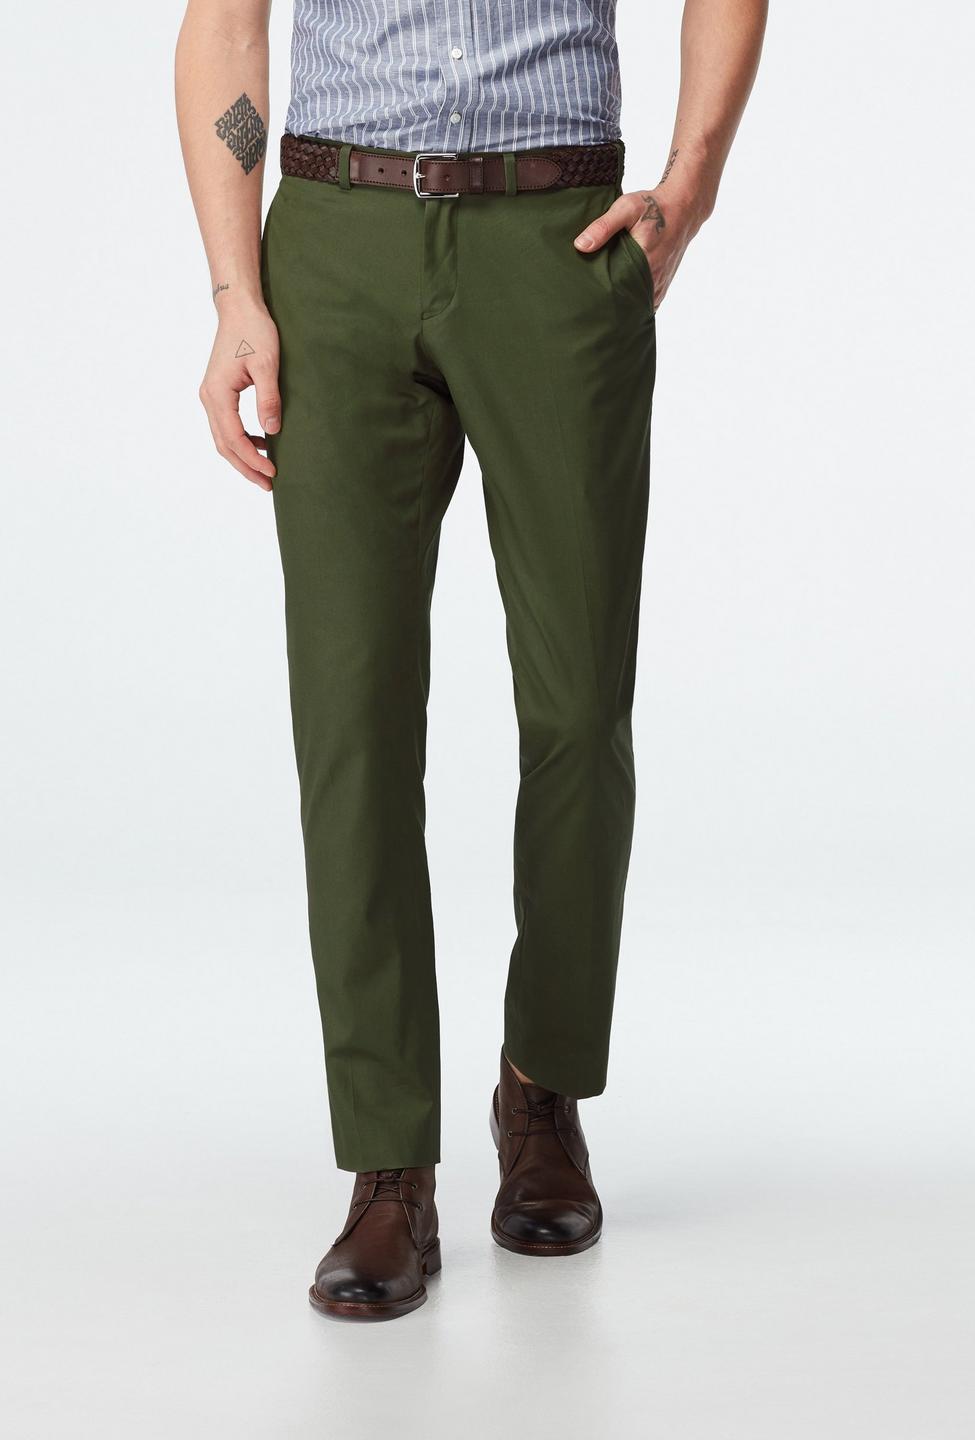 Green pants - Halton Solid Design from Premium Indochino Collection